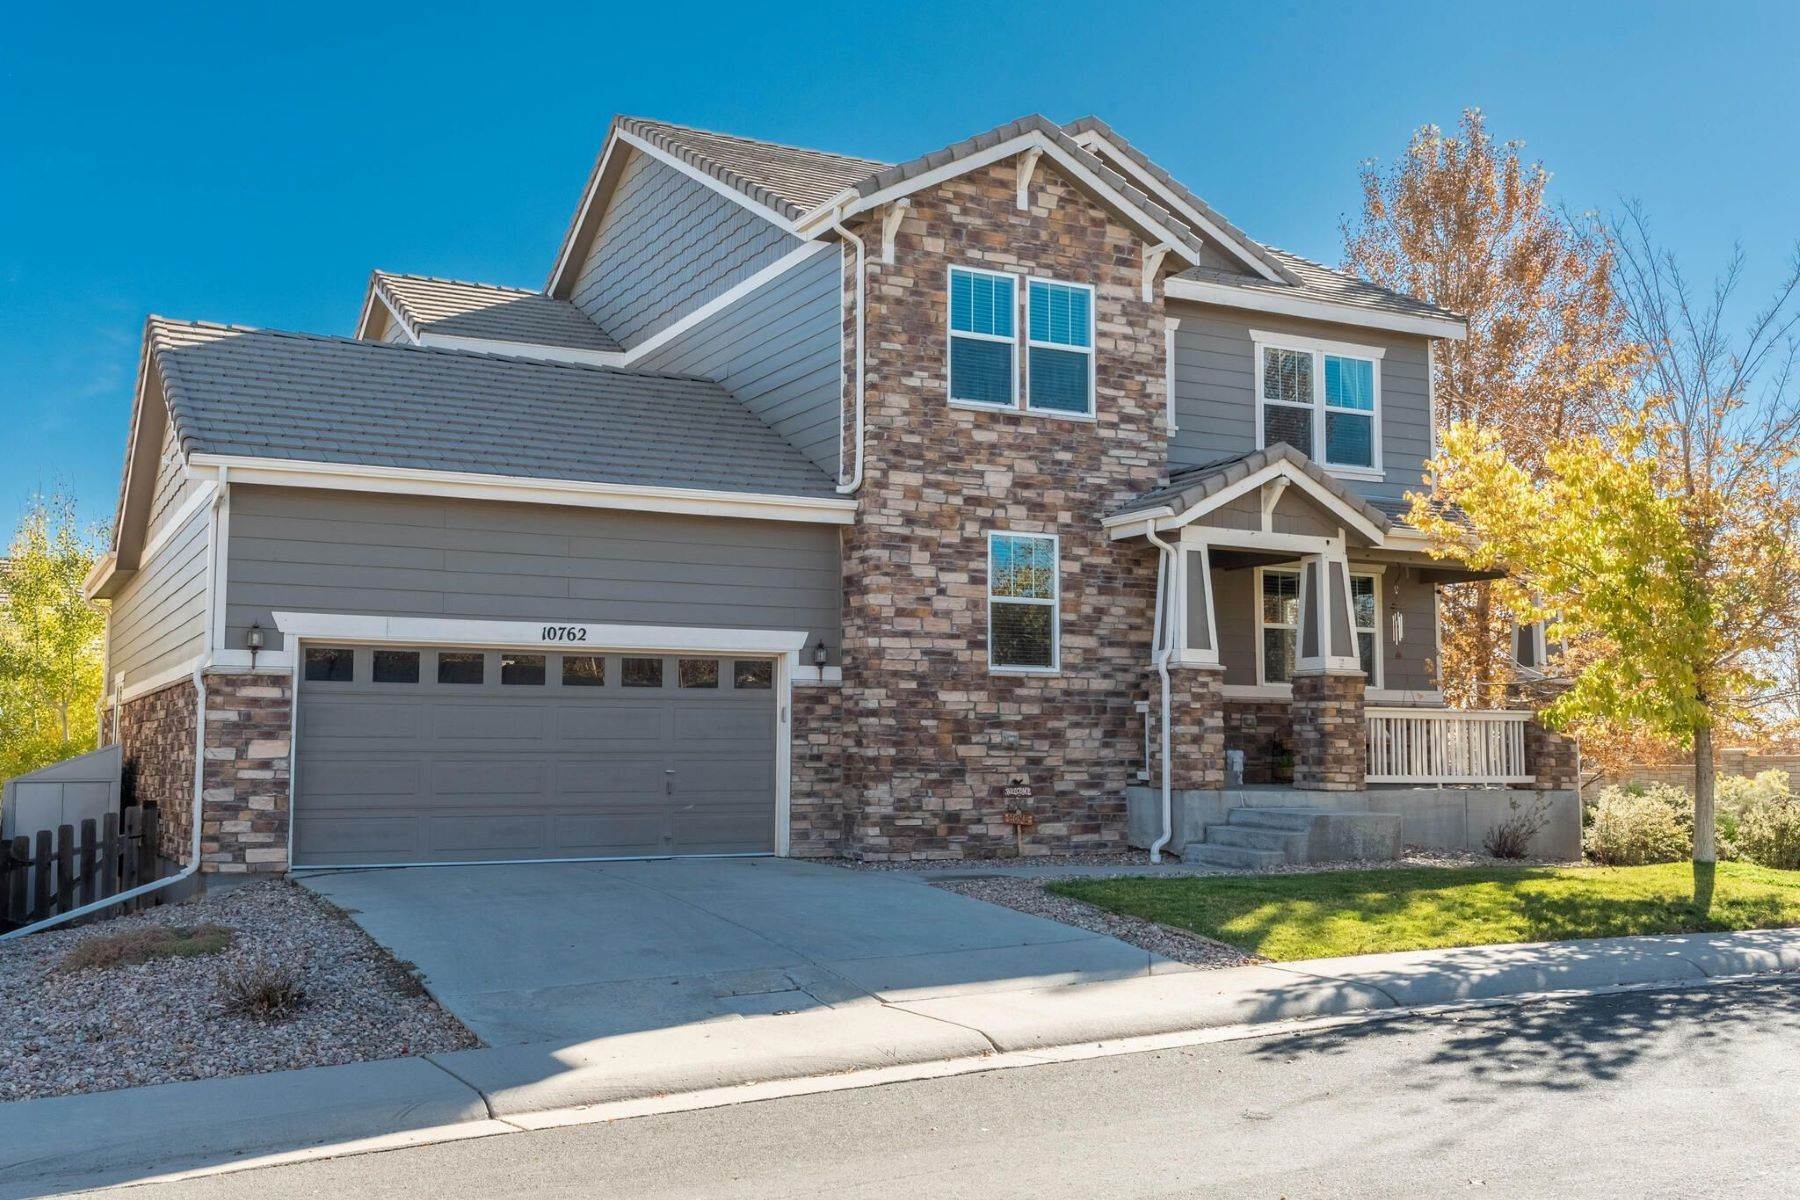 Single Family Homes for Active at In the Heart of the Neighborhood 10762 Hillsboro Circle Parker, Colorado 80134 United States